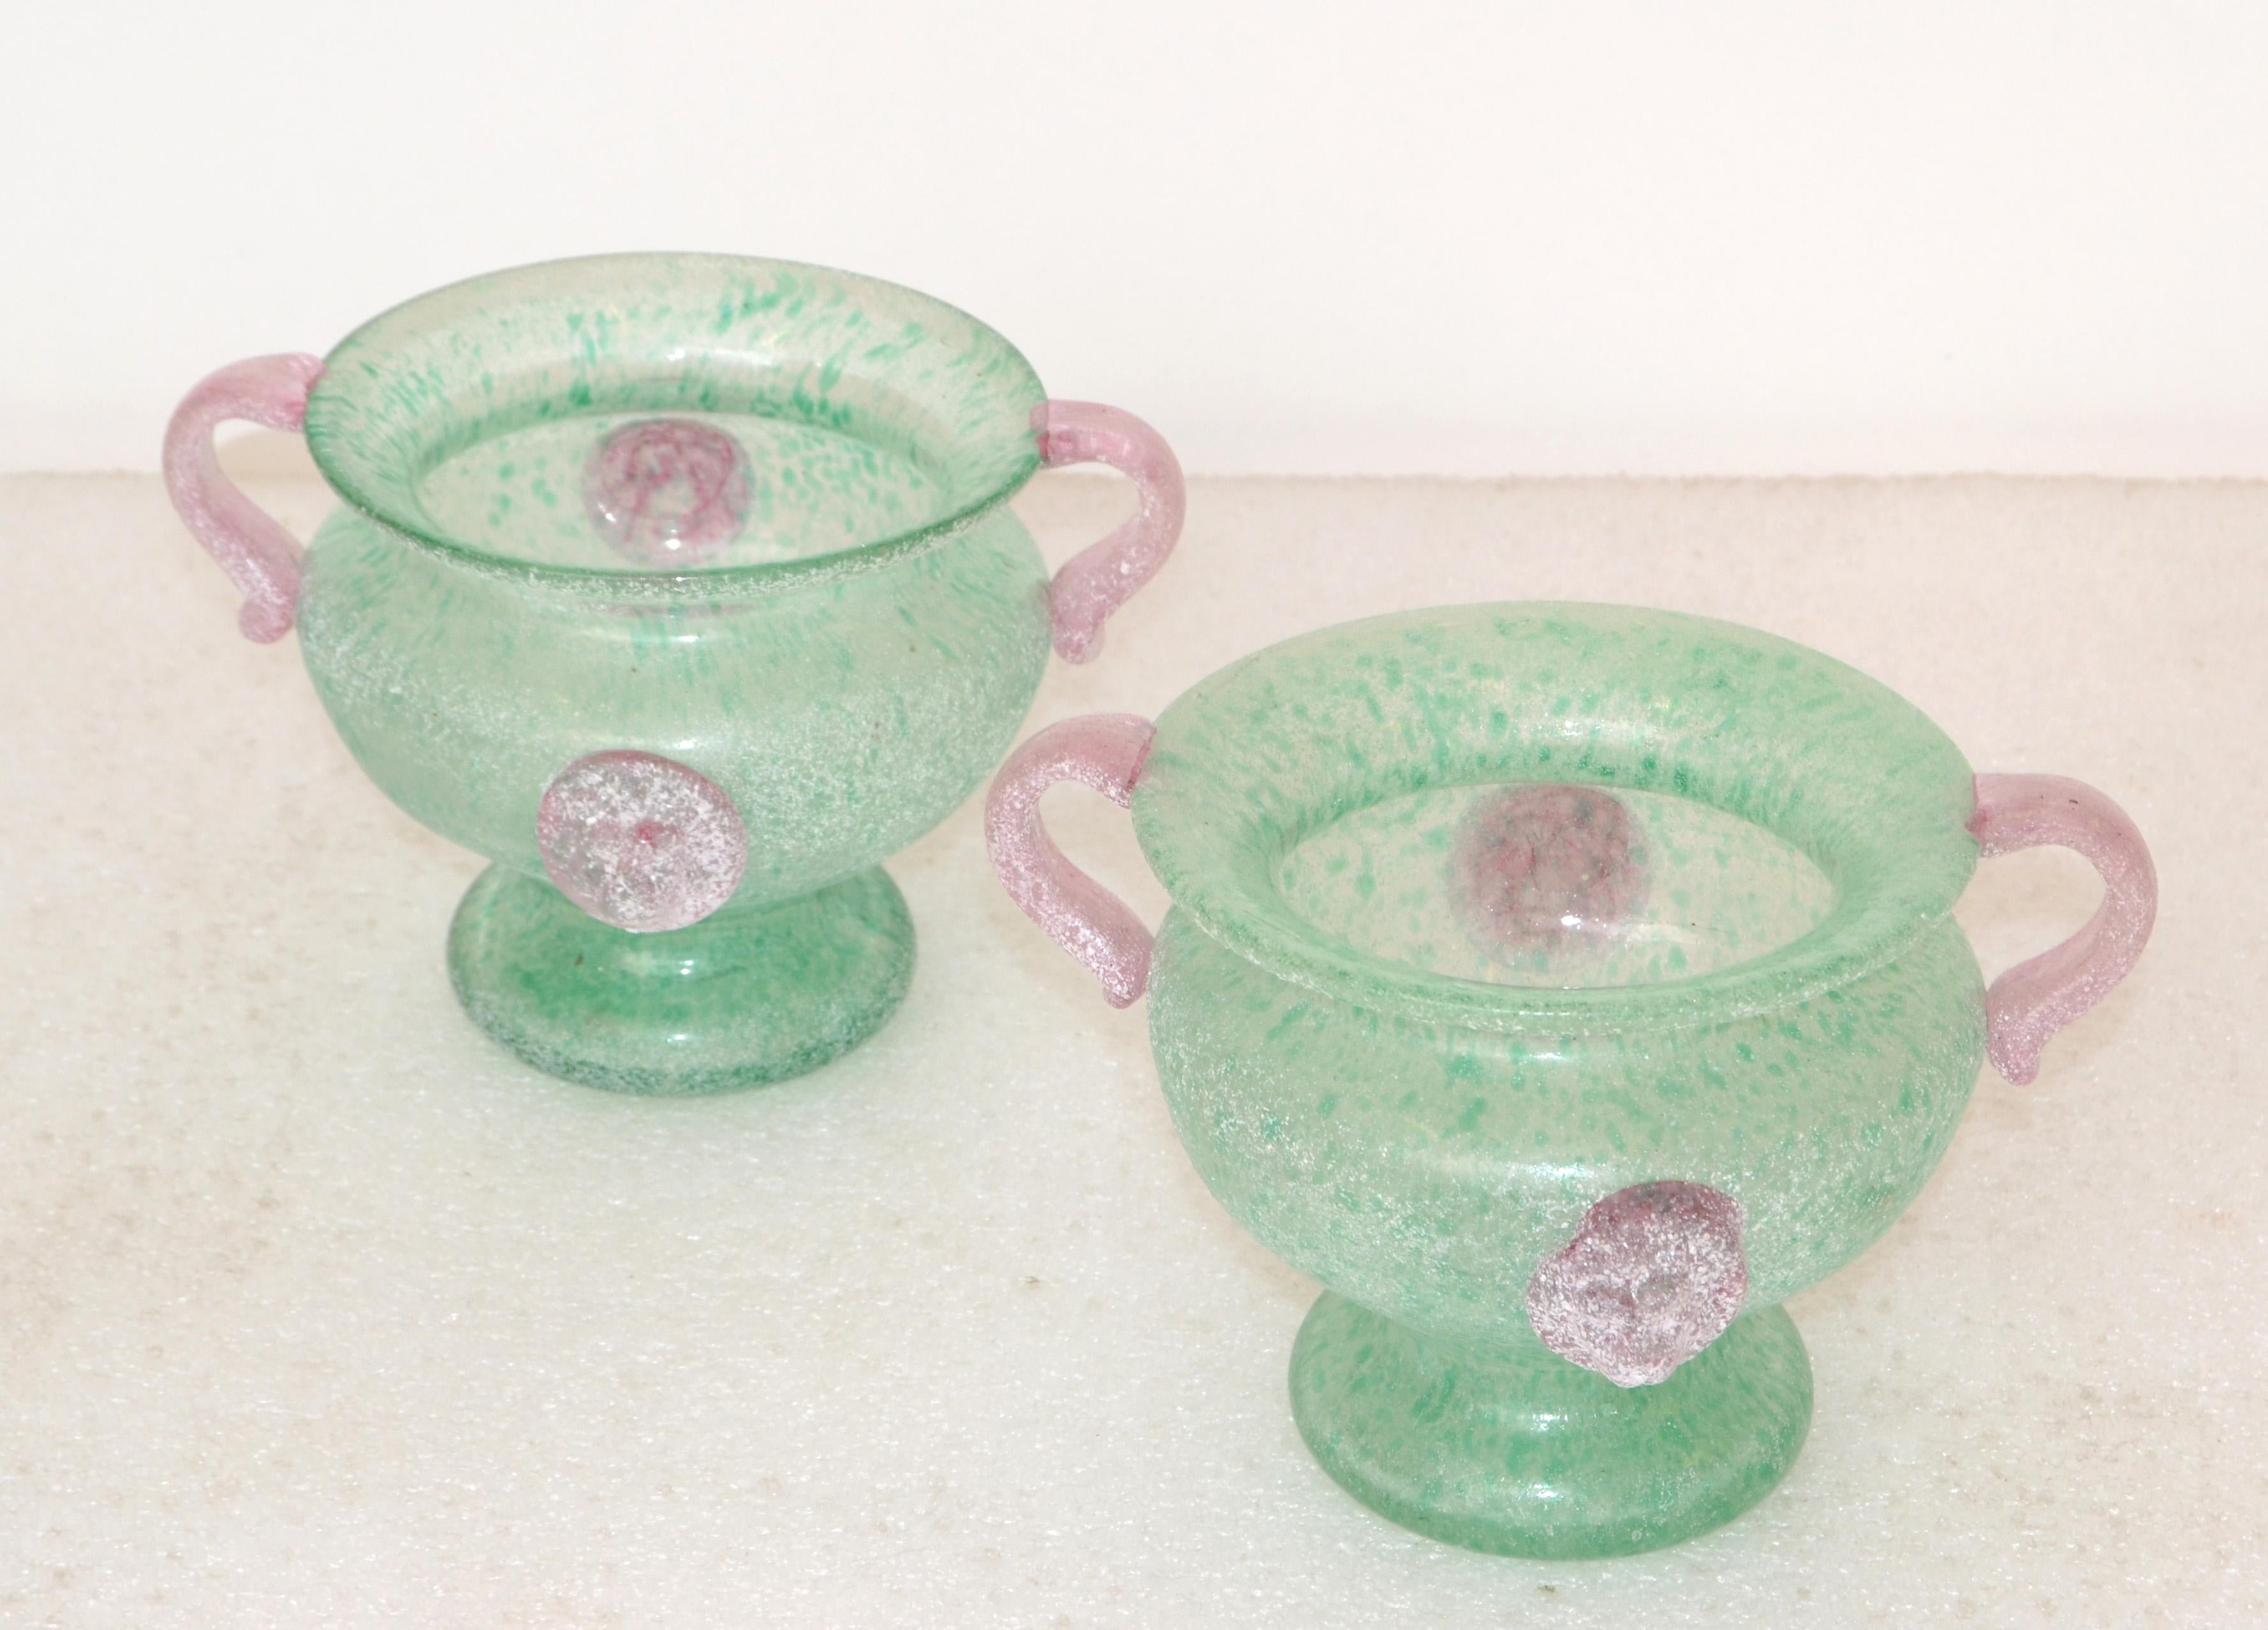 Set of 2 hand-crafted mint green and frosted pink Scavo glass Murano Art glass bowls with handles, vessel Mid-Century Modern made in Italy in 1980.
Diameter: 5.75 inches.